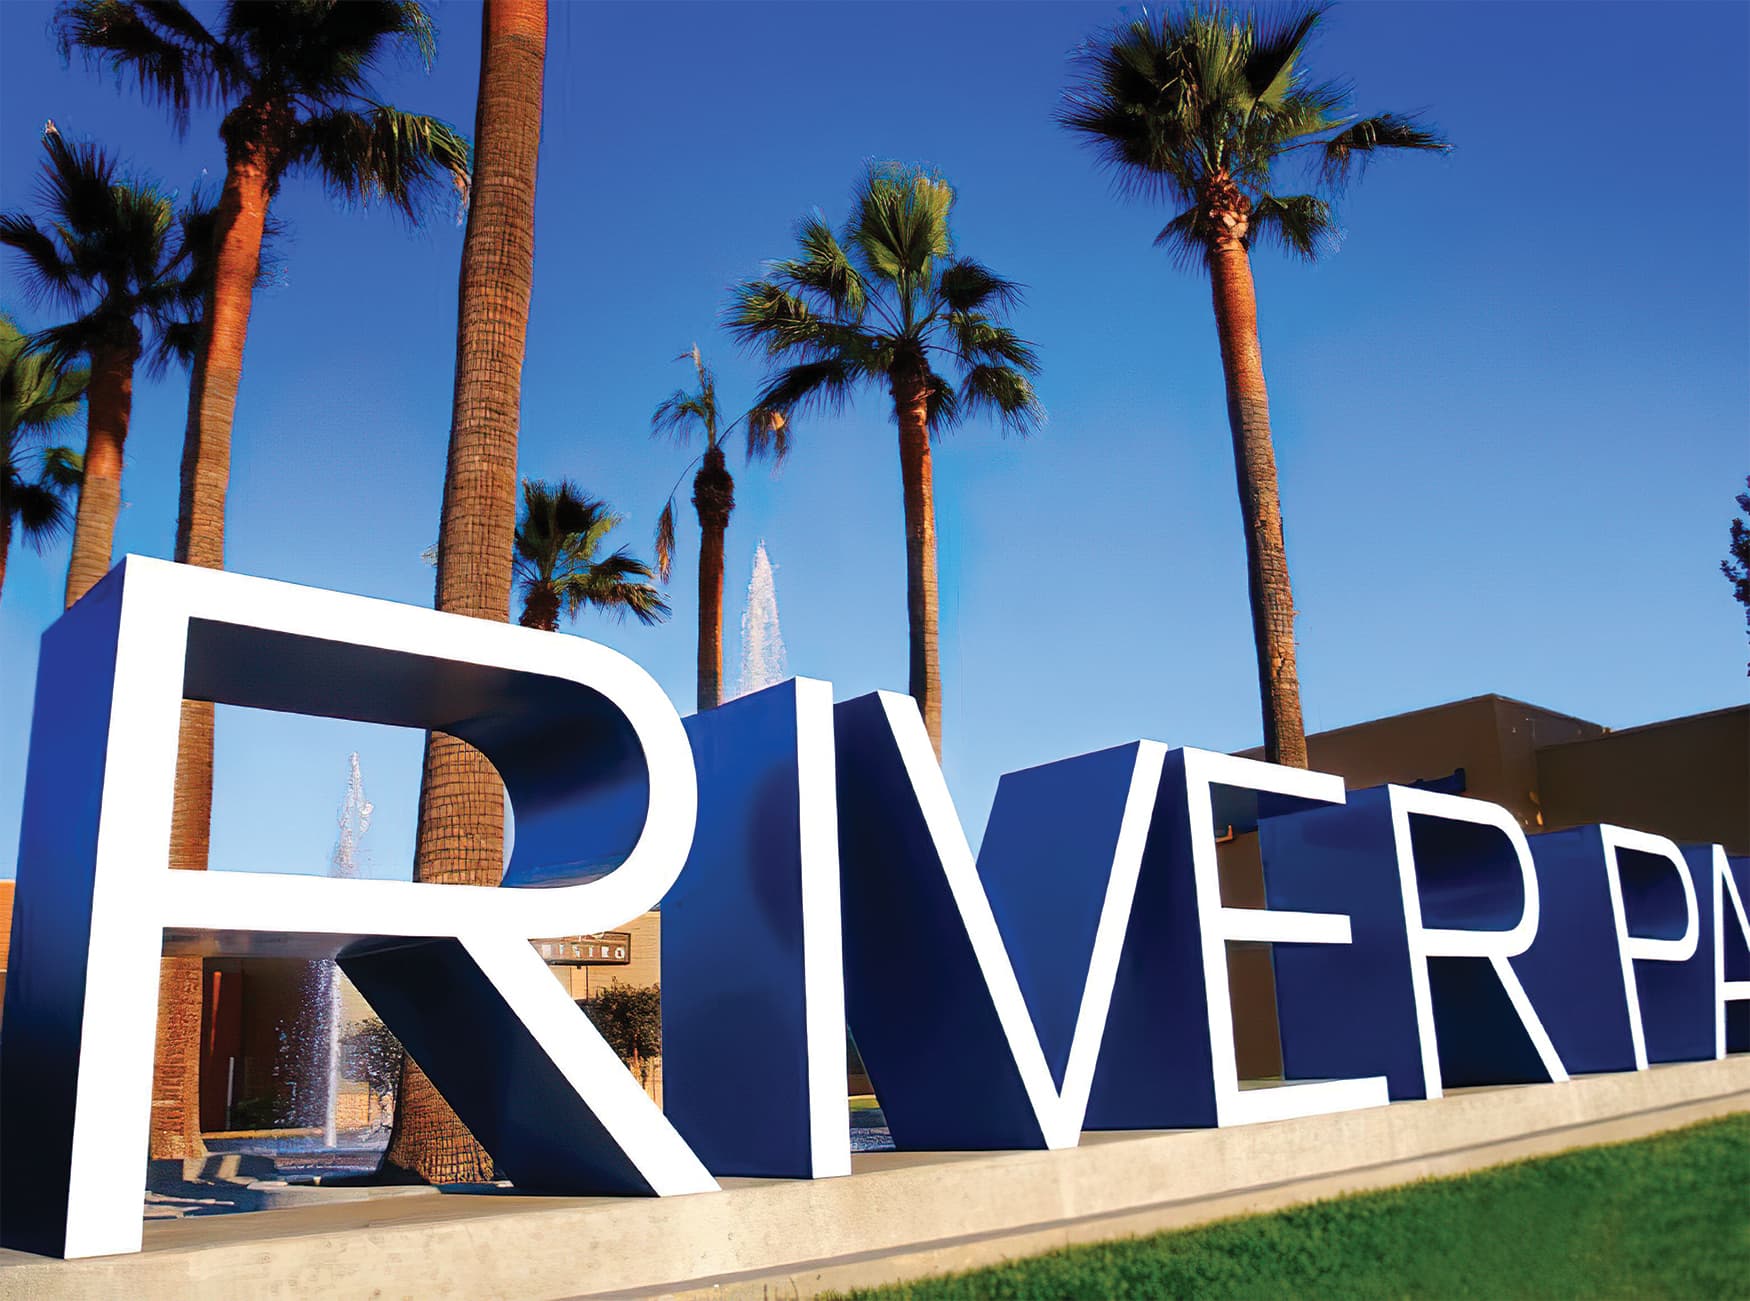 The Shops at River Park, a retail shopping center in Fresno, California. RSM Design prepared environmental graphic design services as well as wayfinding and placemaking elements. Project Identity Monument.